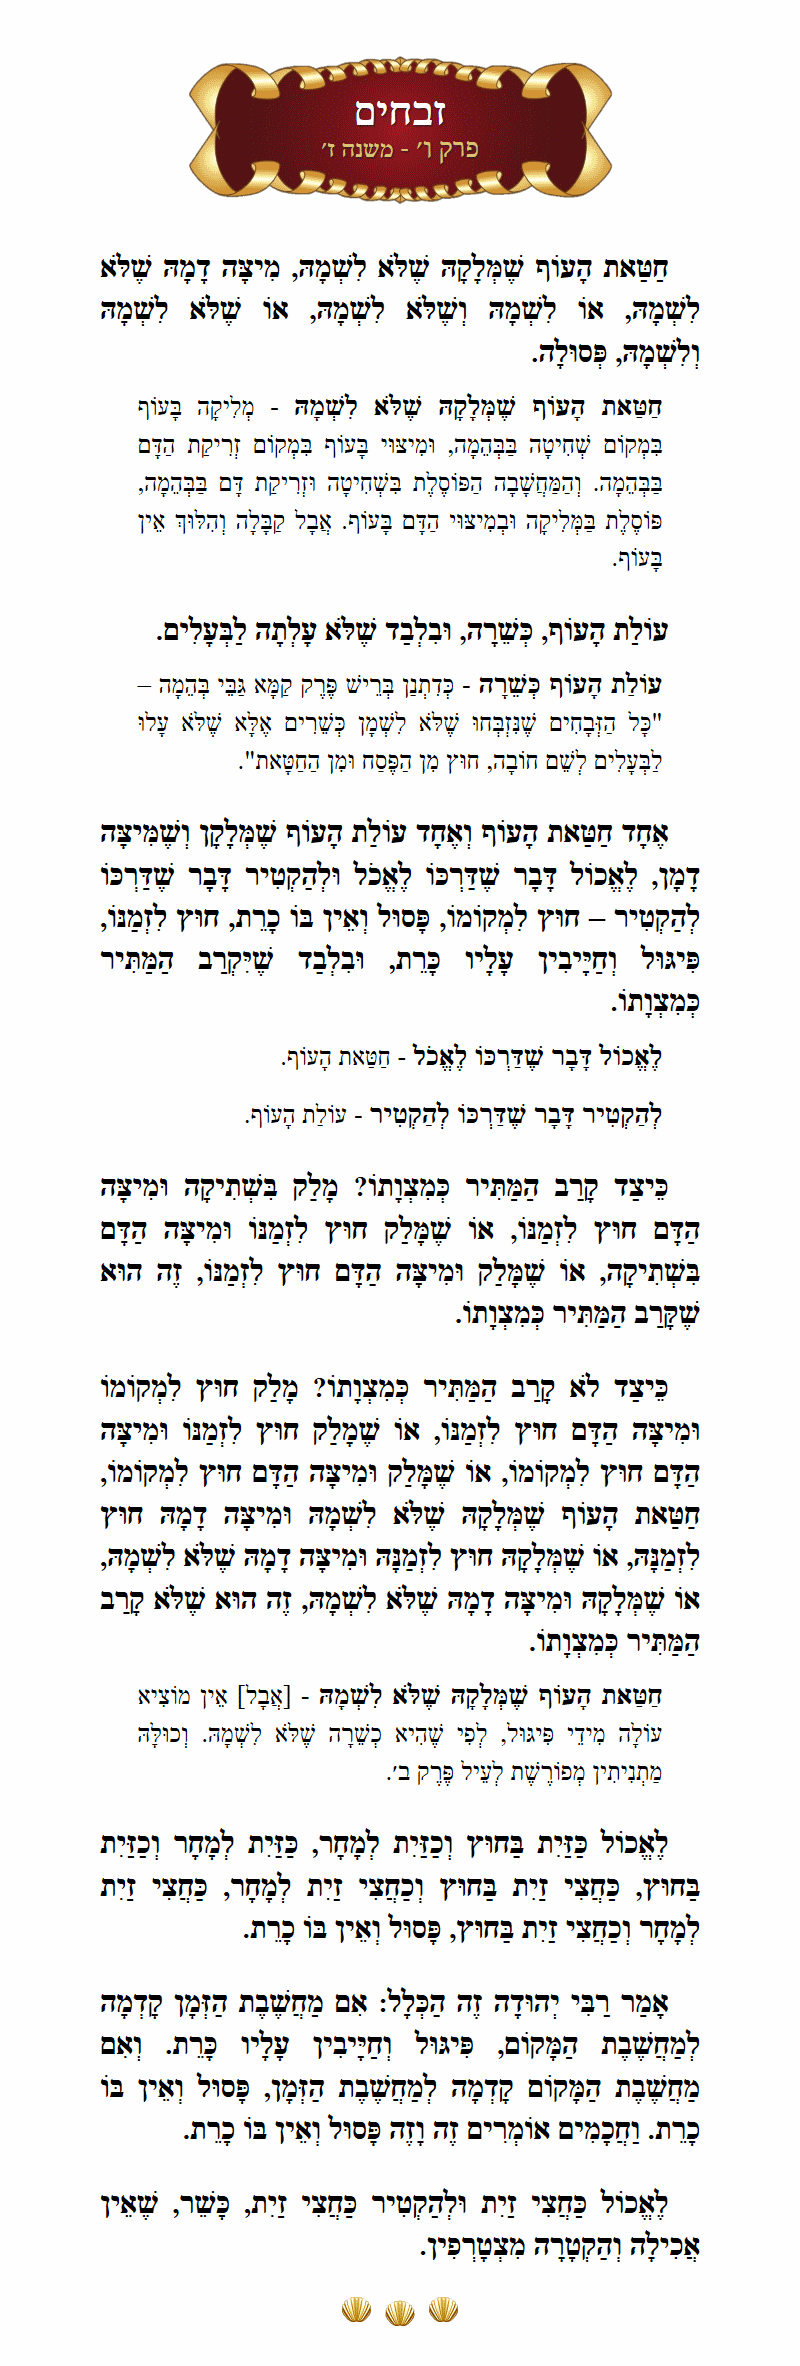 Masechta Zevachim Chapter 6 Mishnah 7 with commentary